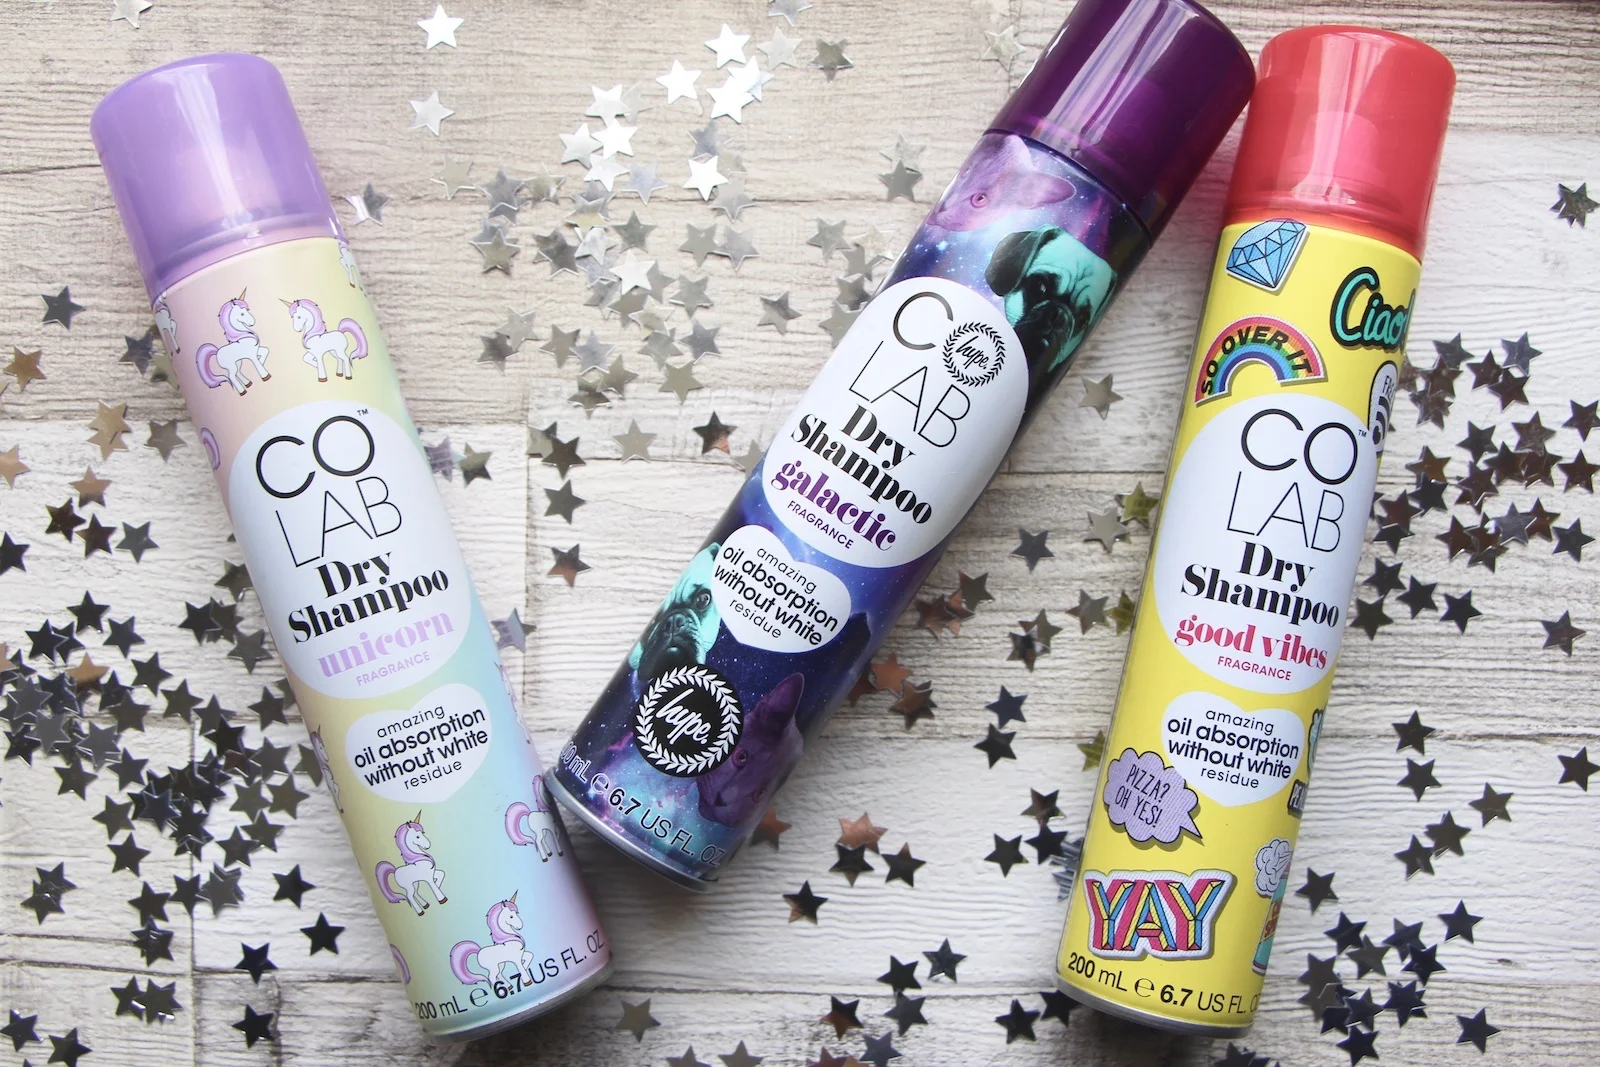 My Star Haircare Buy – now at Boots!